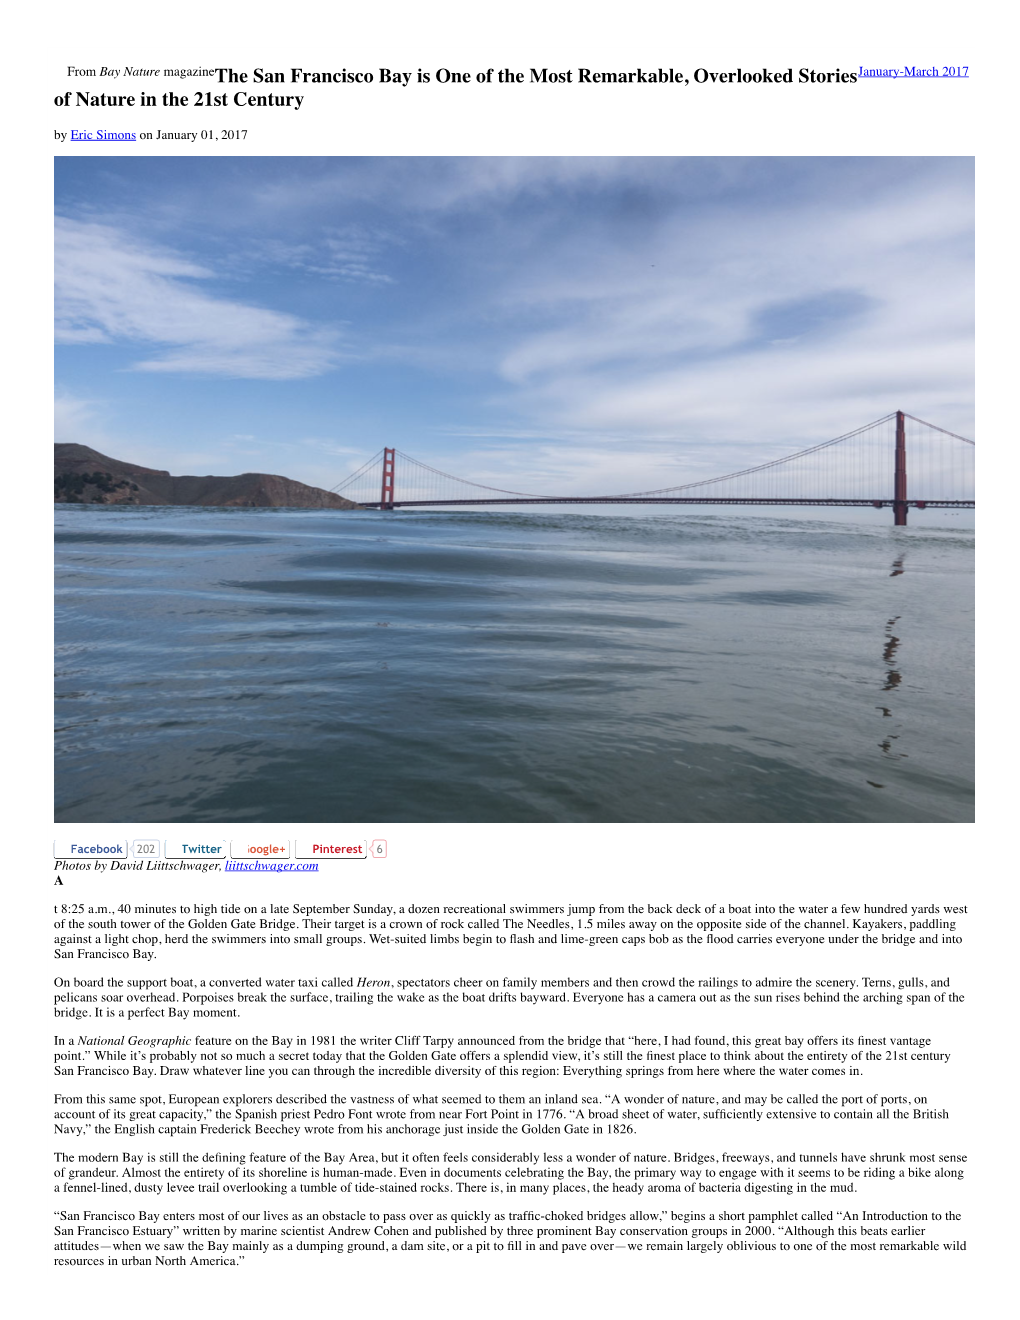 The San Francisco Bay Is One of the Most Remarkable, Overlooked Storiesjanuary-March 2017 of Nature in the 21St Century by Eric Simons on January 01, 2017